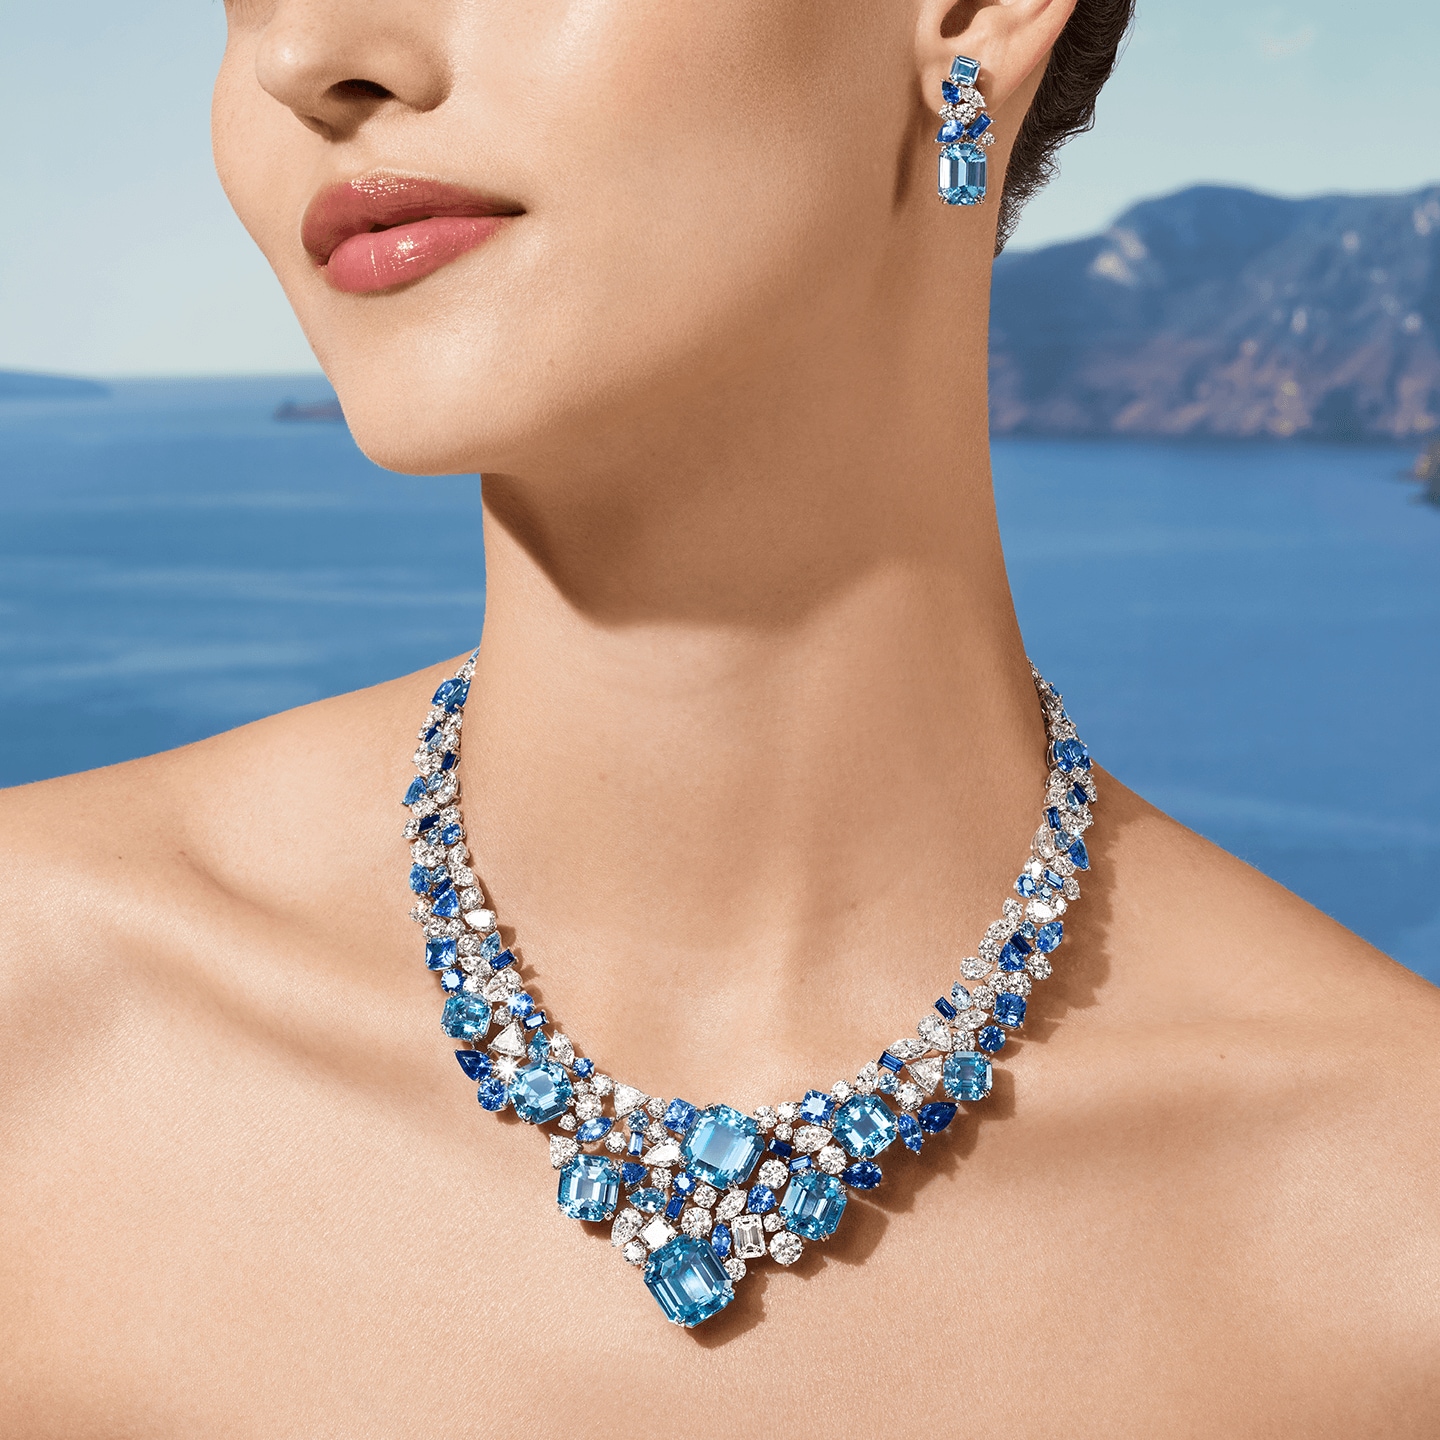 Woman wearing the Santorini Necklace and Earrings